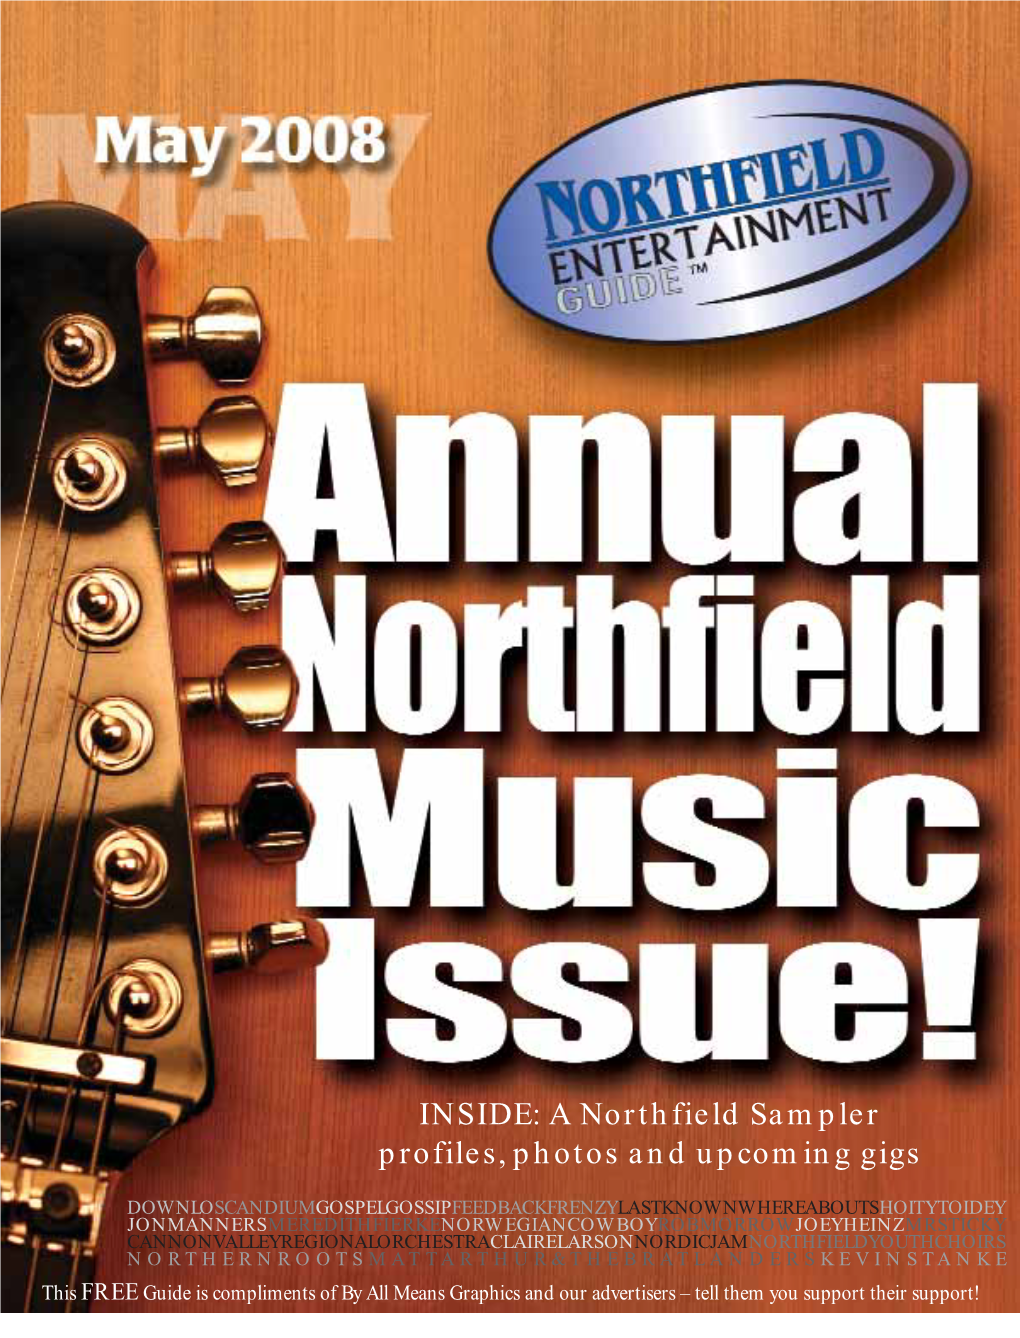 A Northfield Sampler Profiles, Photos and Upcoming Gigs